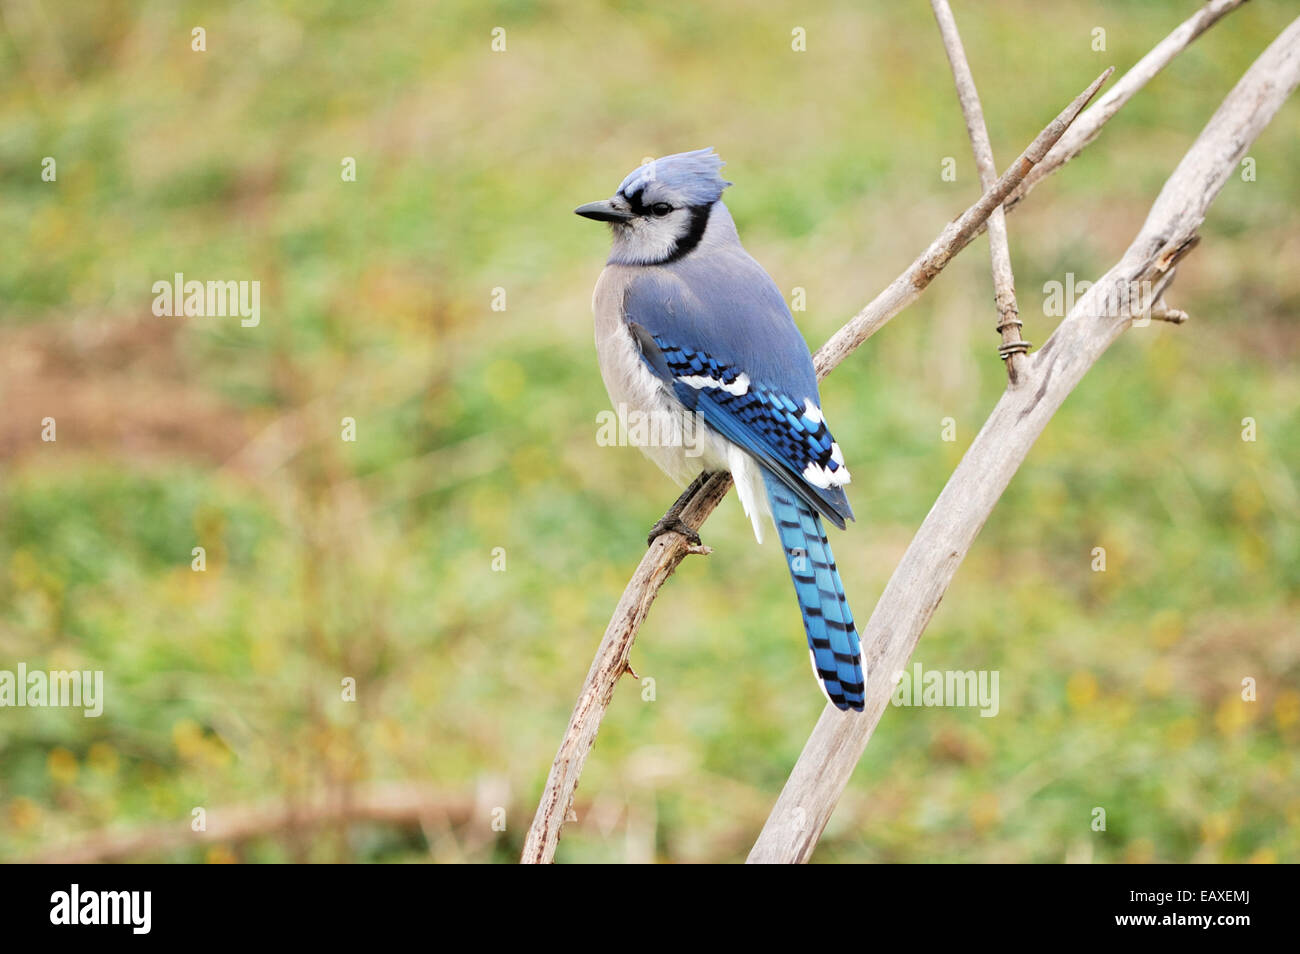 A blue jay perched on a tree branch. Stock Photo